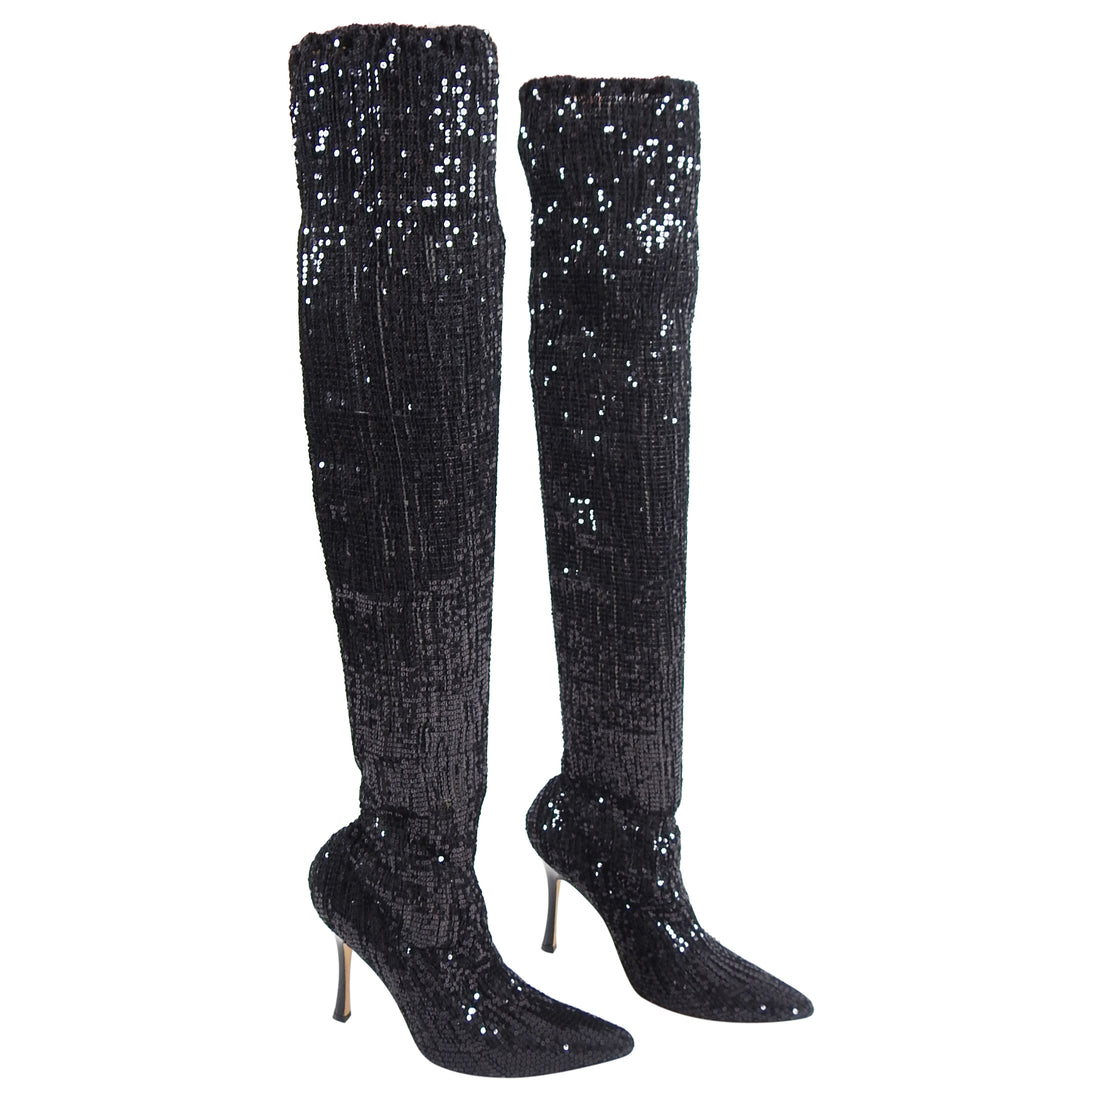 Manolo Blahnik Pascalare Black Sequin Over the Knee Sock Boots - 37